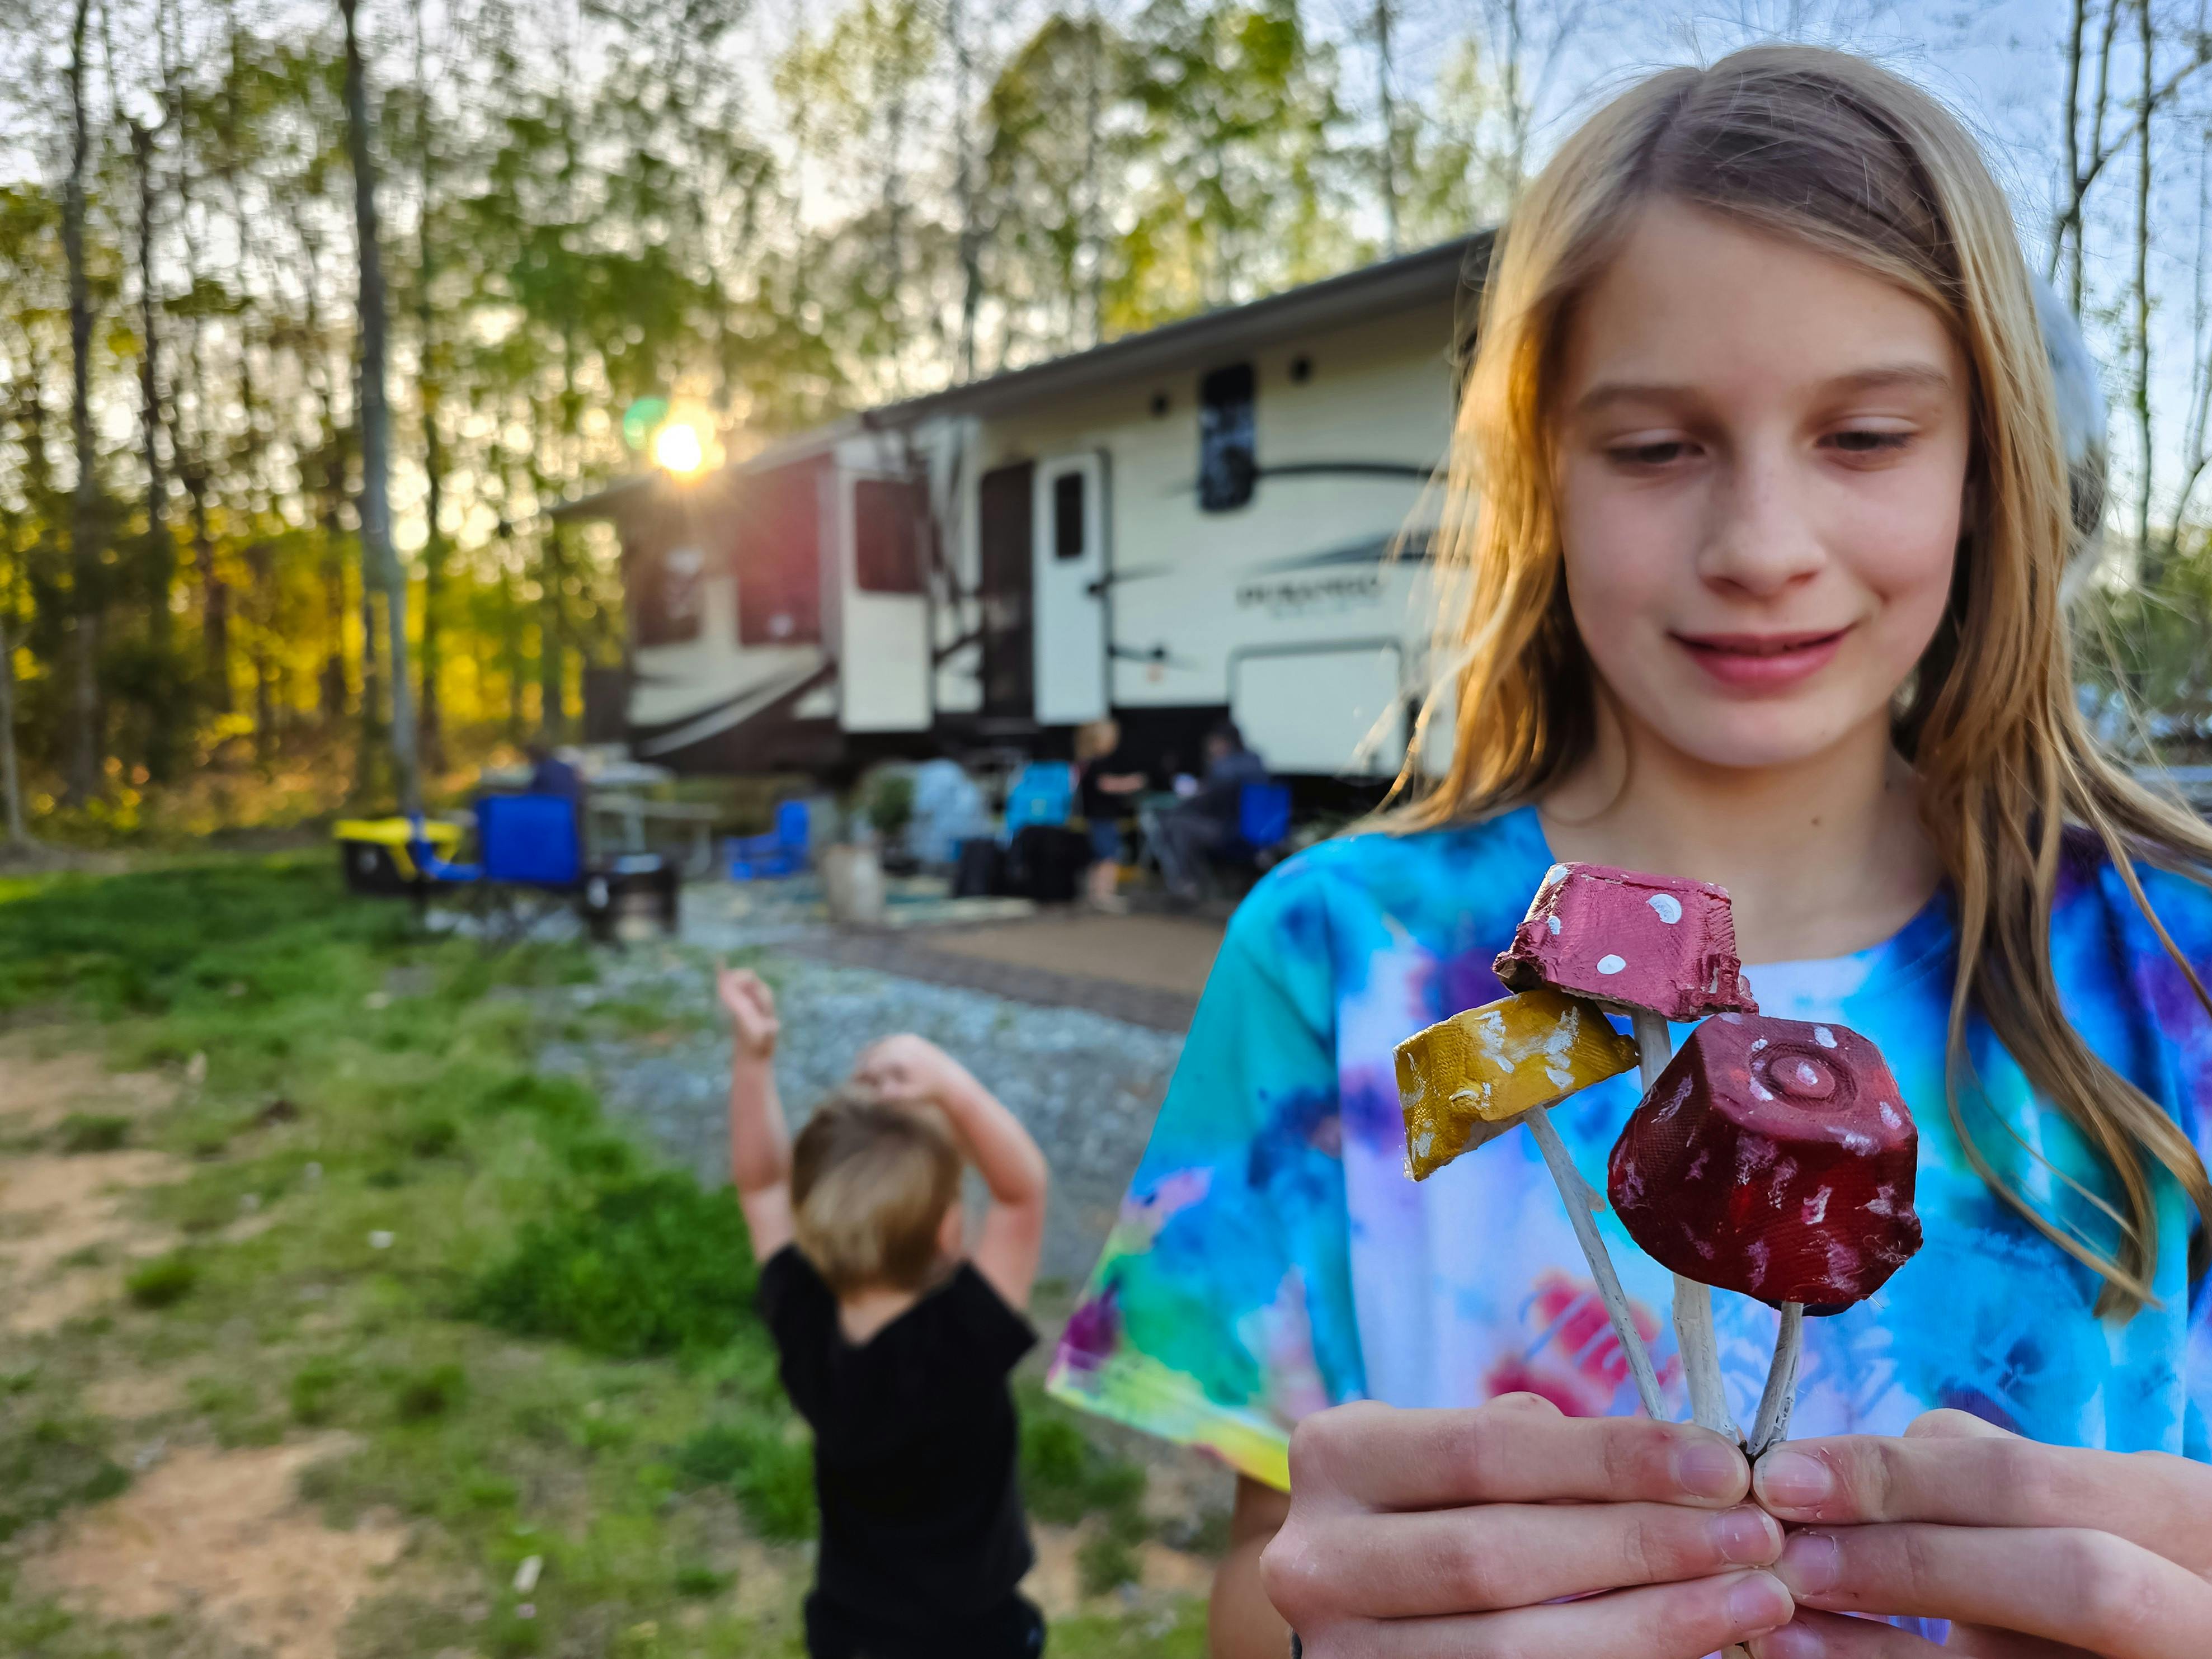 The Barringer kids showing off their mushroom crafts next to their KZ Durango Gold fifth wheel.